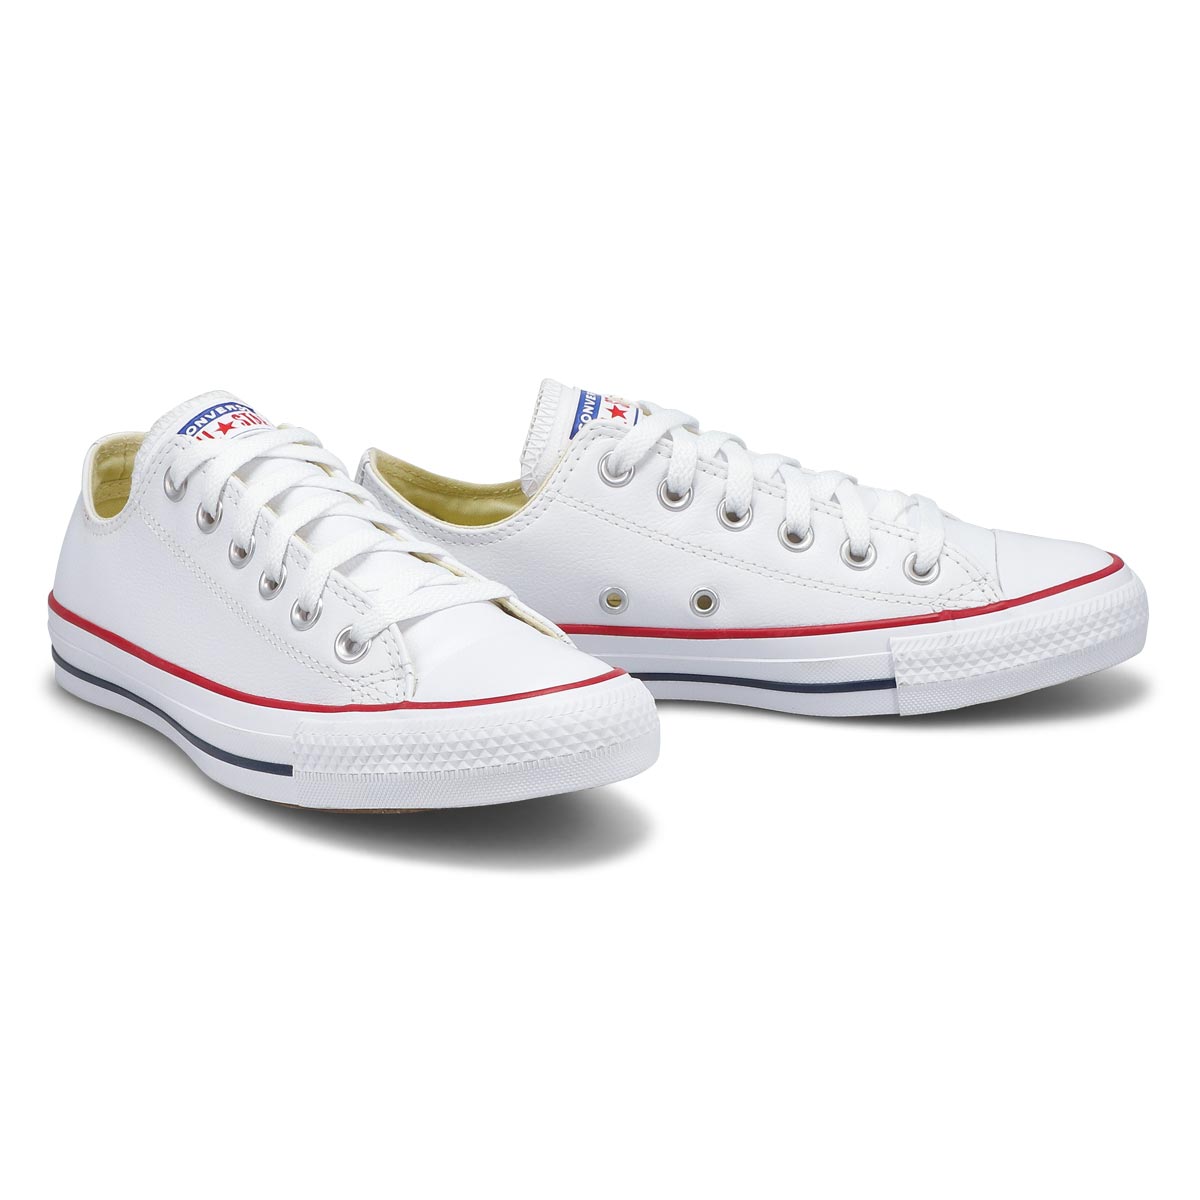 Women's All Star Leather Ox Sneaker -  White